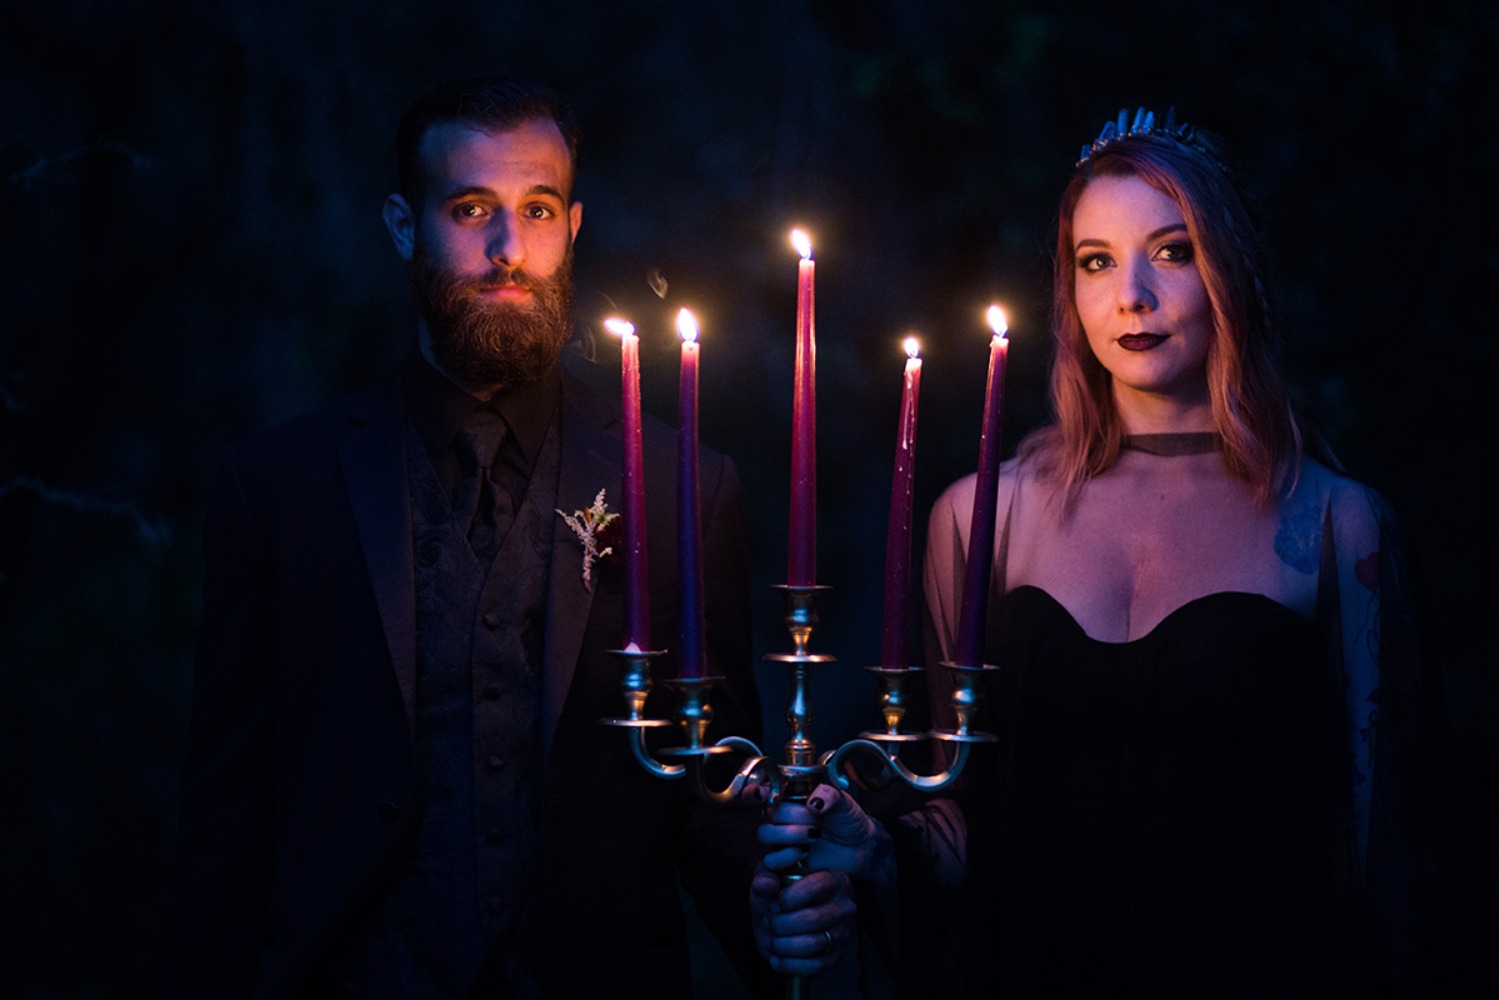 dramatic wedding photos with candles